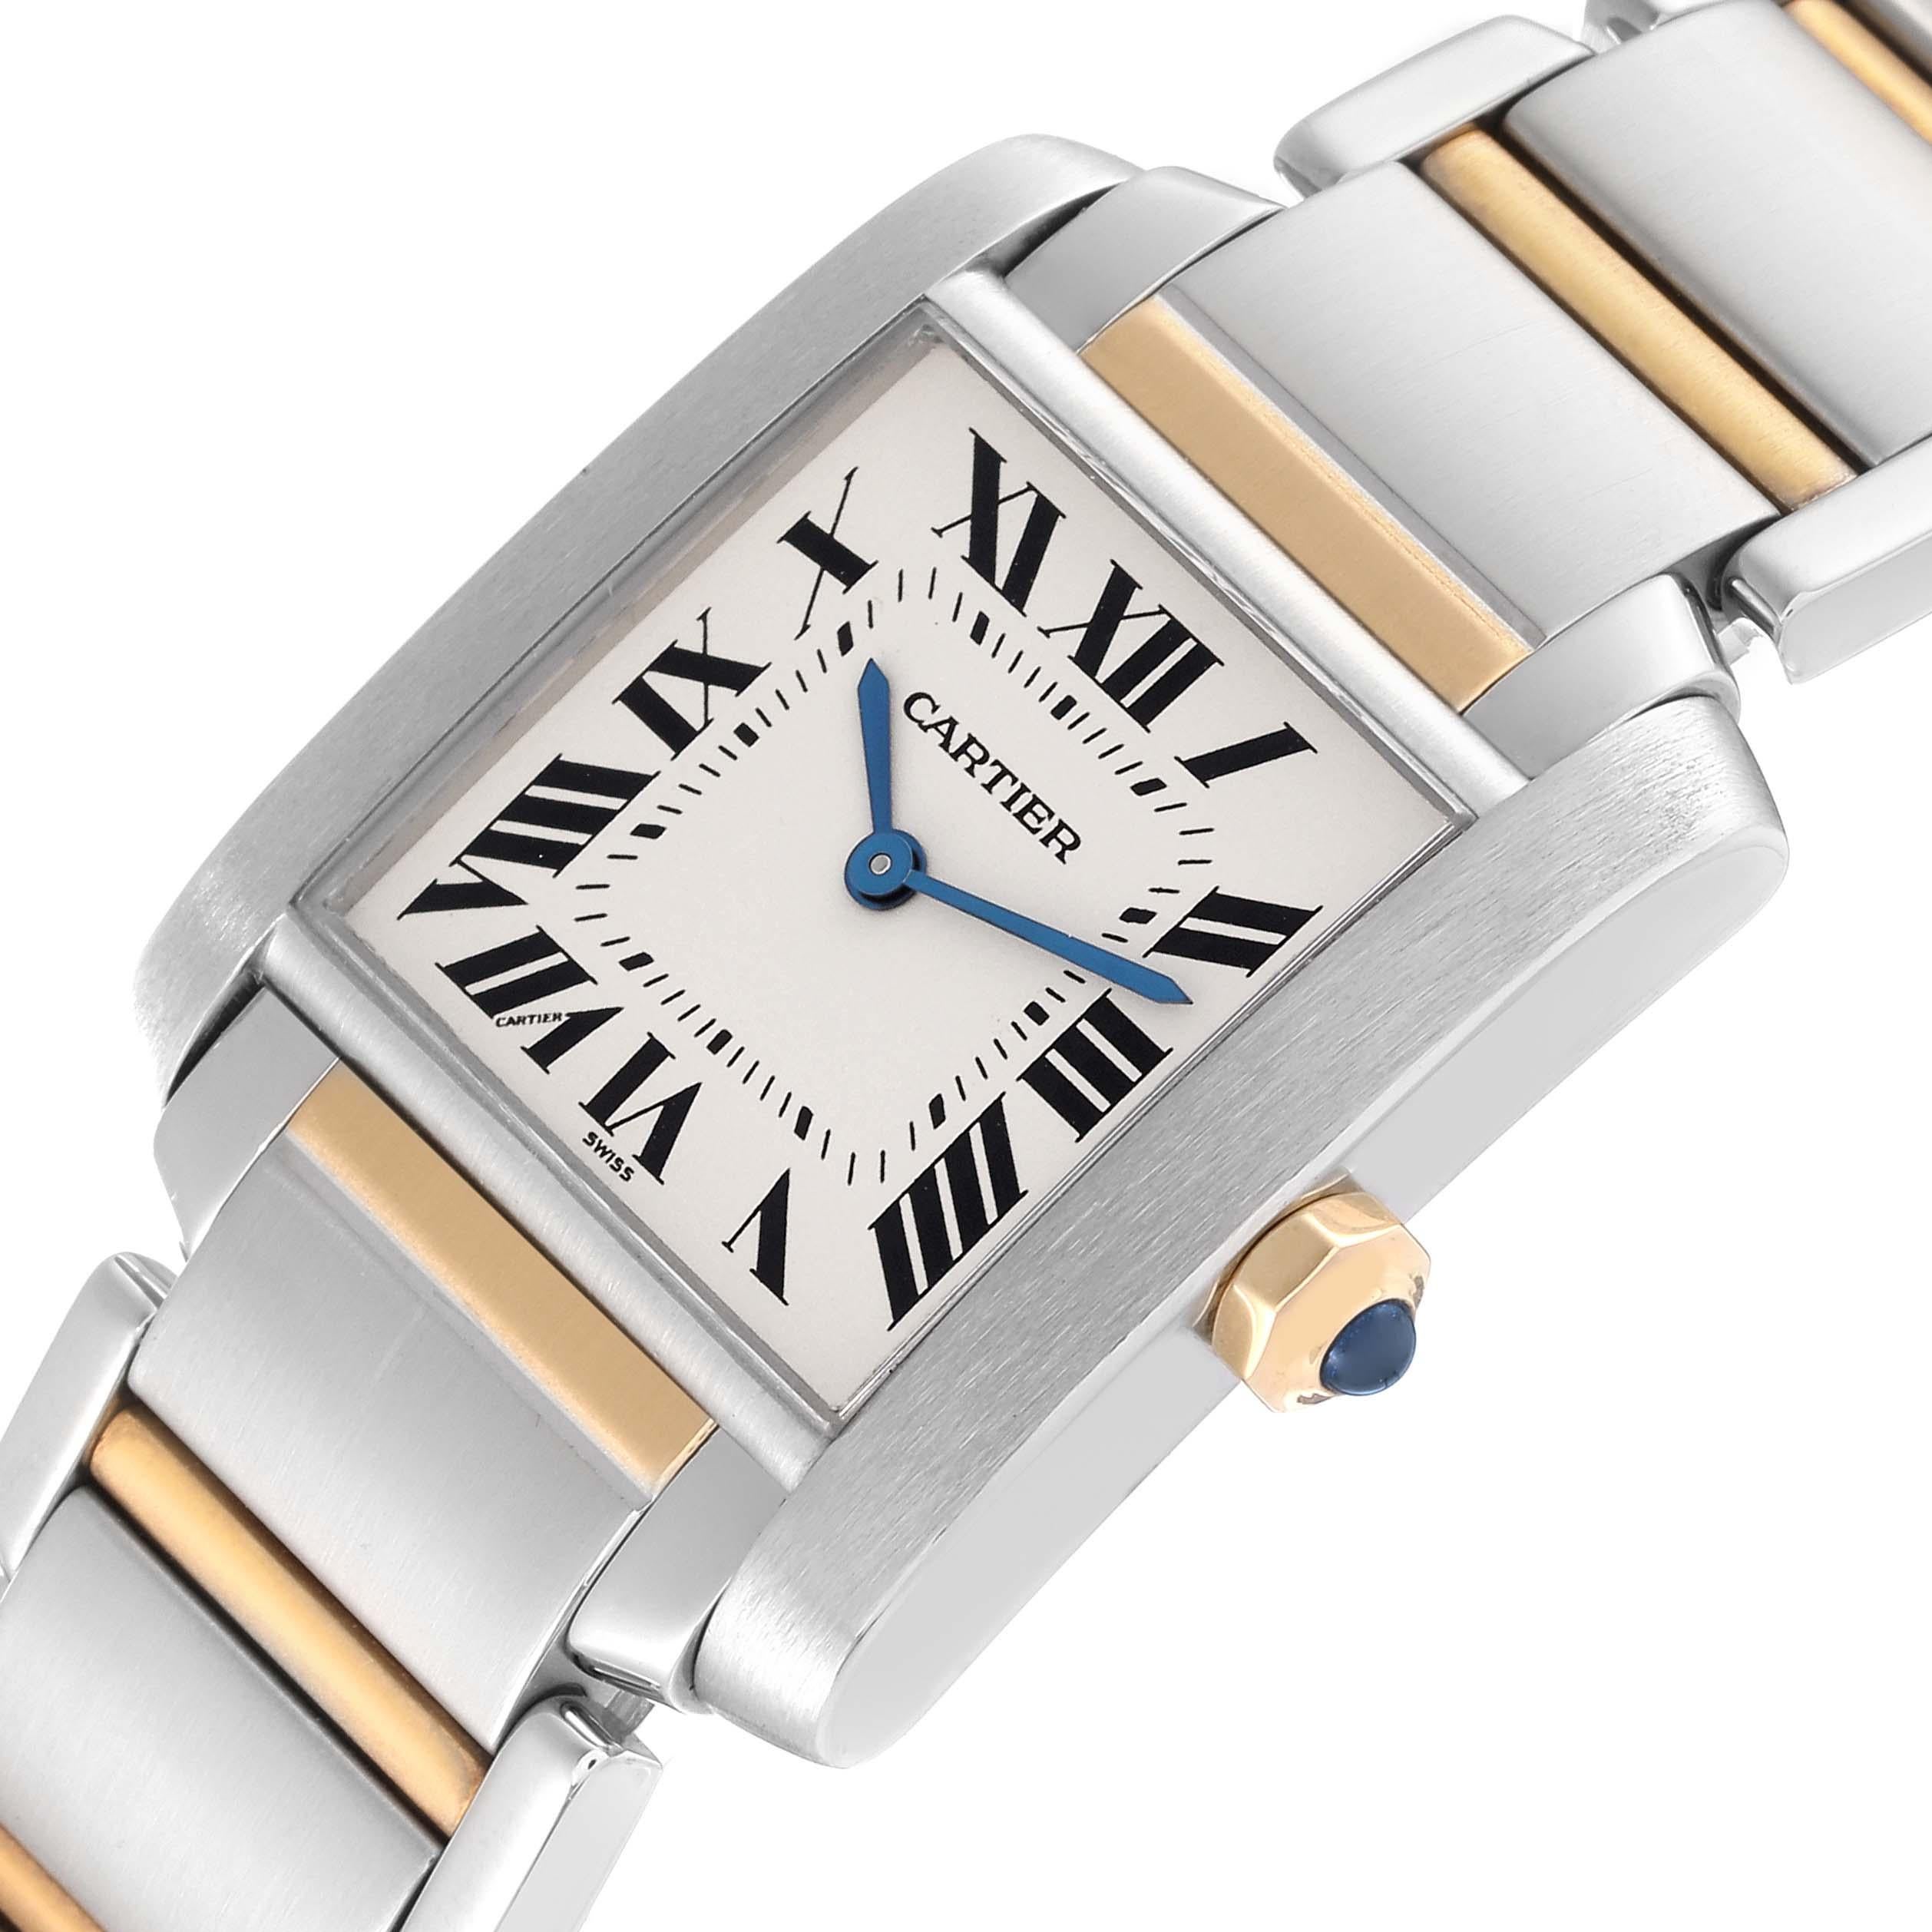 Cartier Tank Francaise Steel Yellow Gold Mens Watch W51006Q4 Box Papers 1